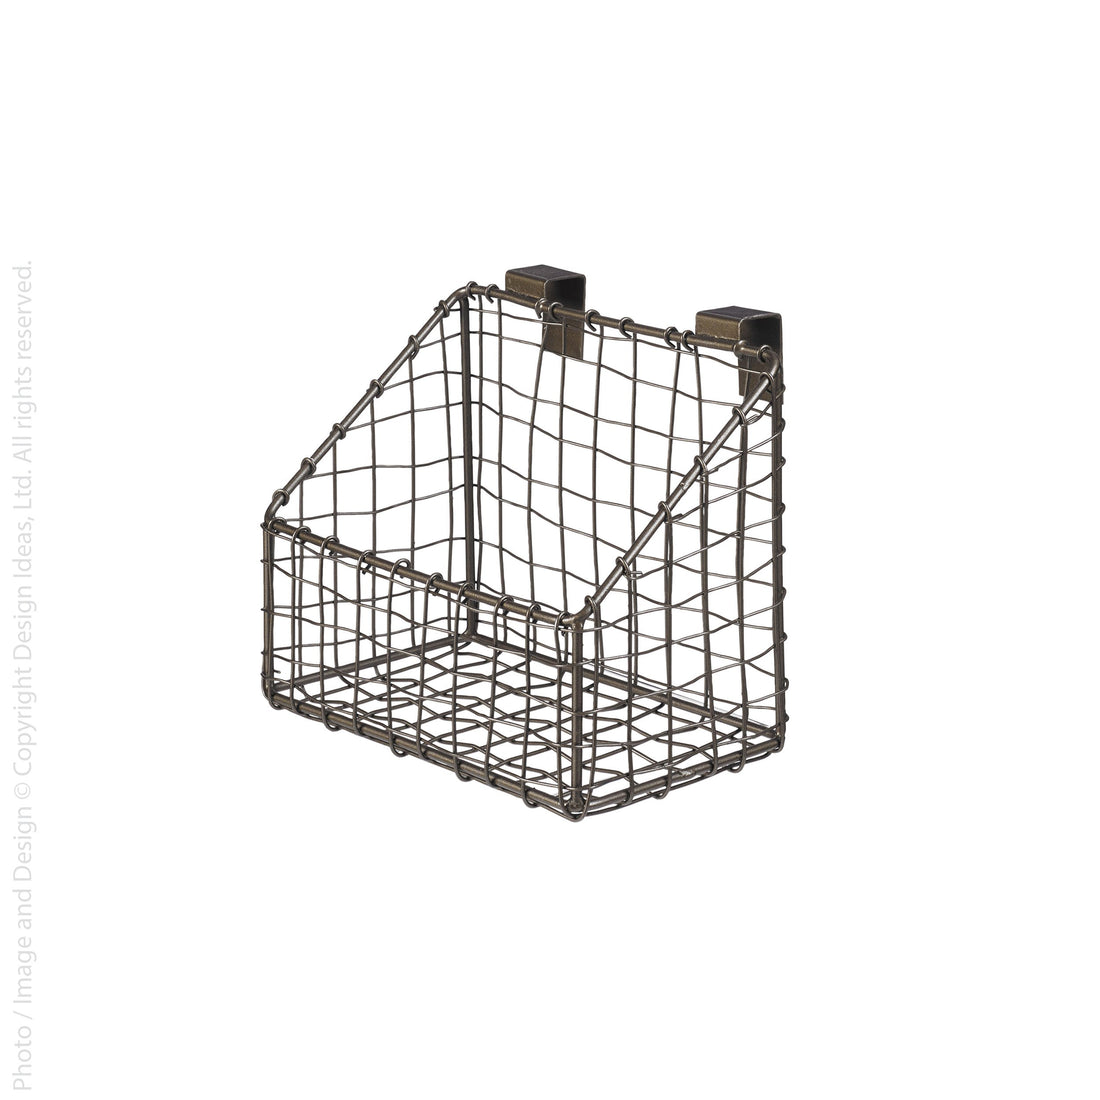 Cabo™ woven wire slanted basket (small)